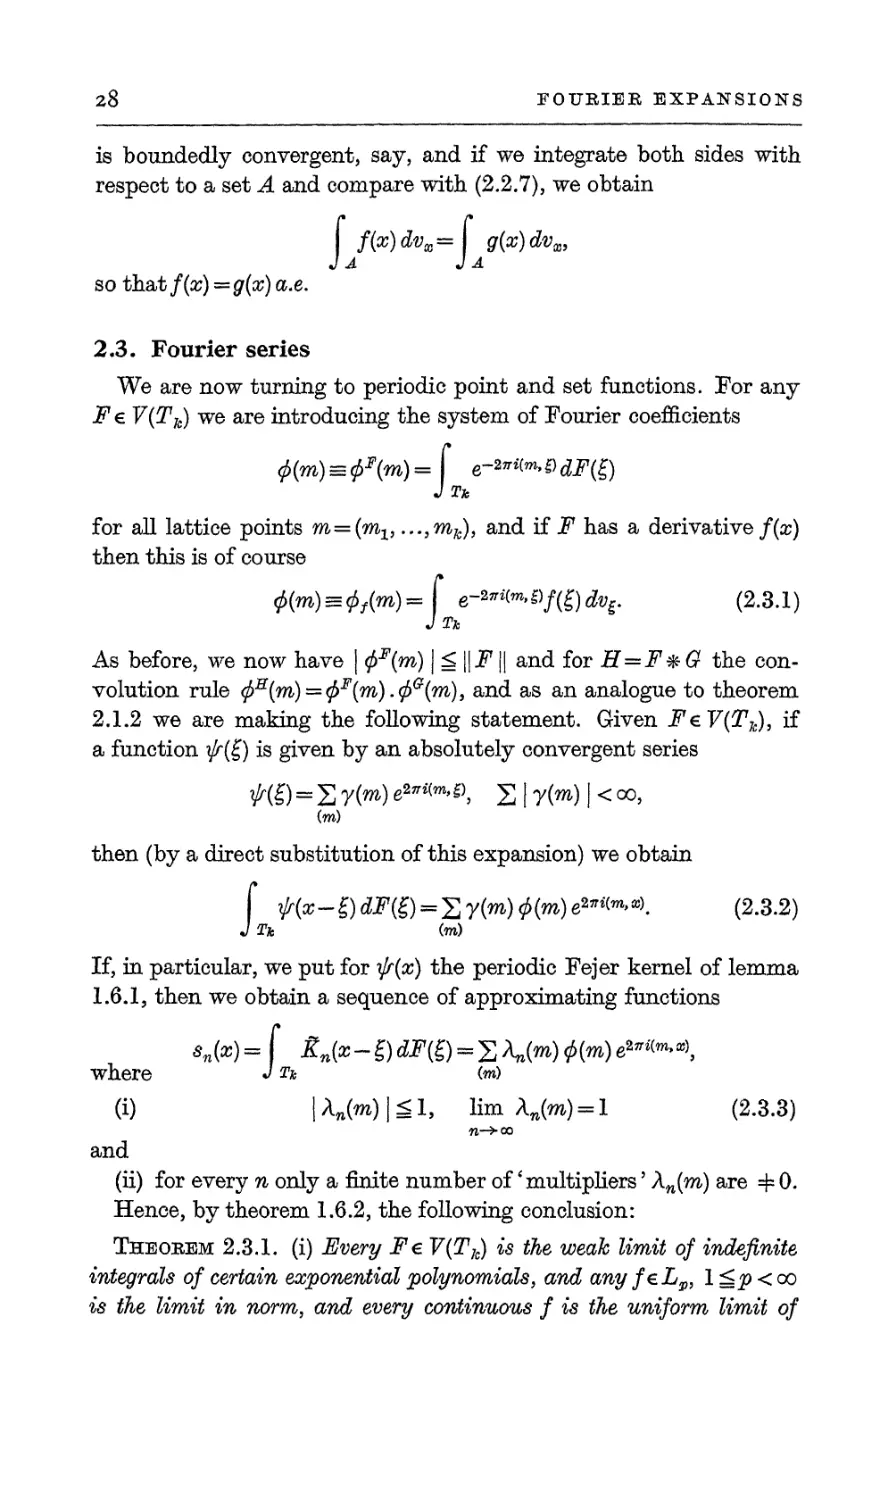 2.3. Fourier series